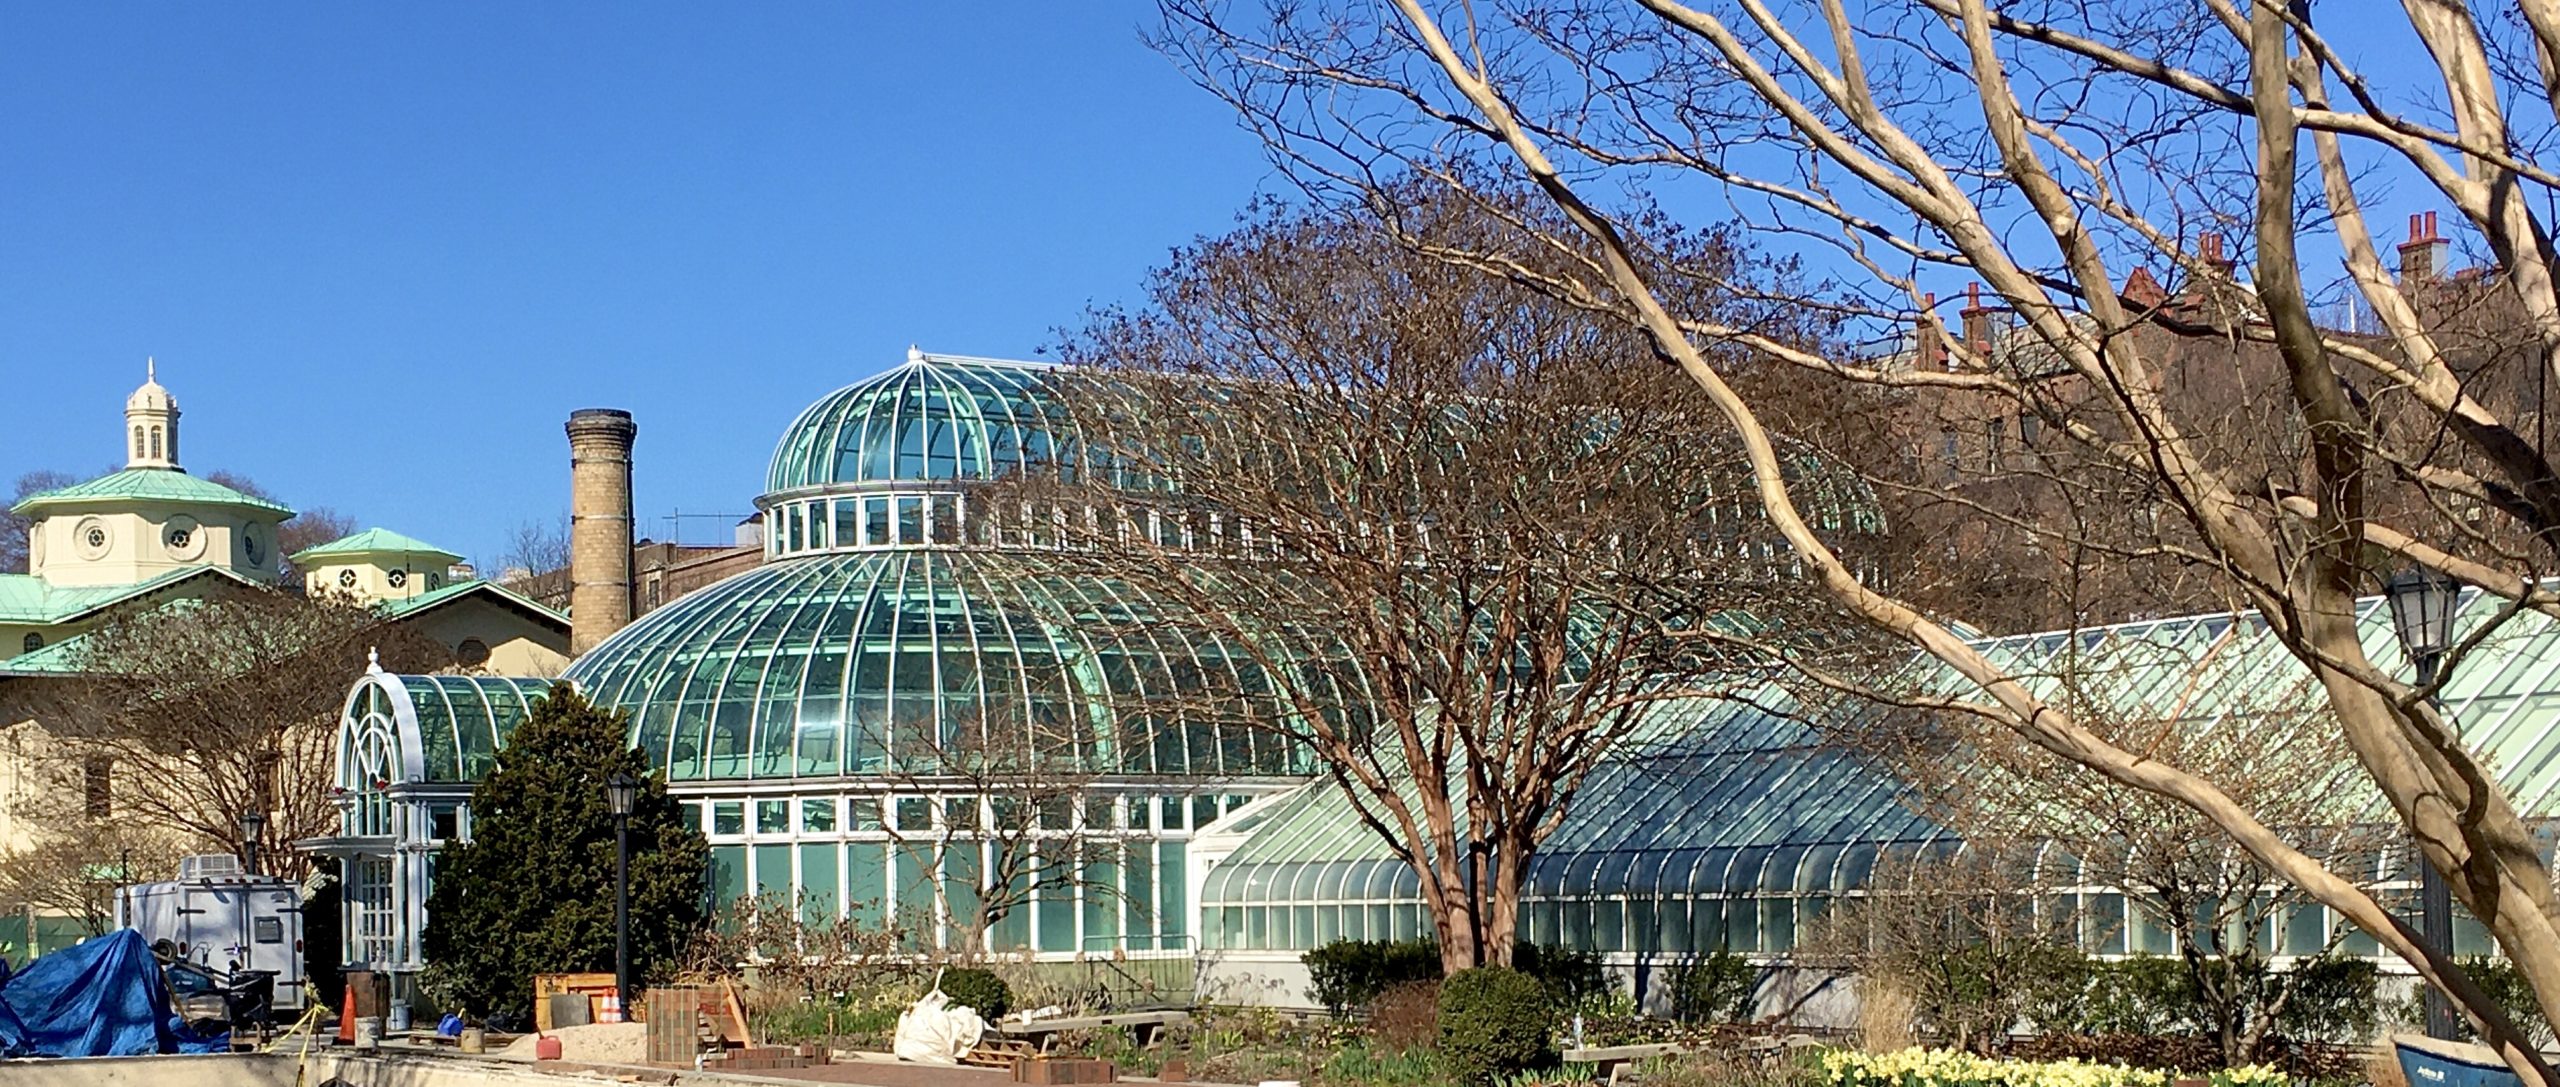 When I visited Brooklyn Botanic Garden, the greenhouses had already been closed to keep people from standing close to one another. Photo: Lore Croghan/Brooklyn Eagle